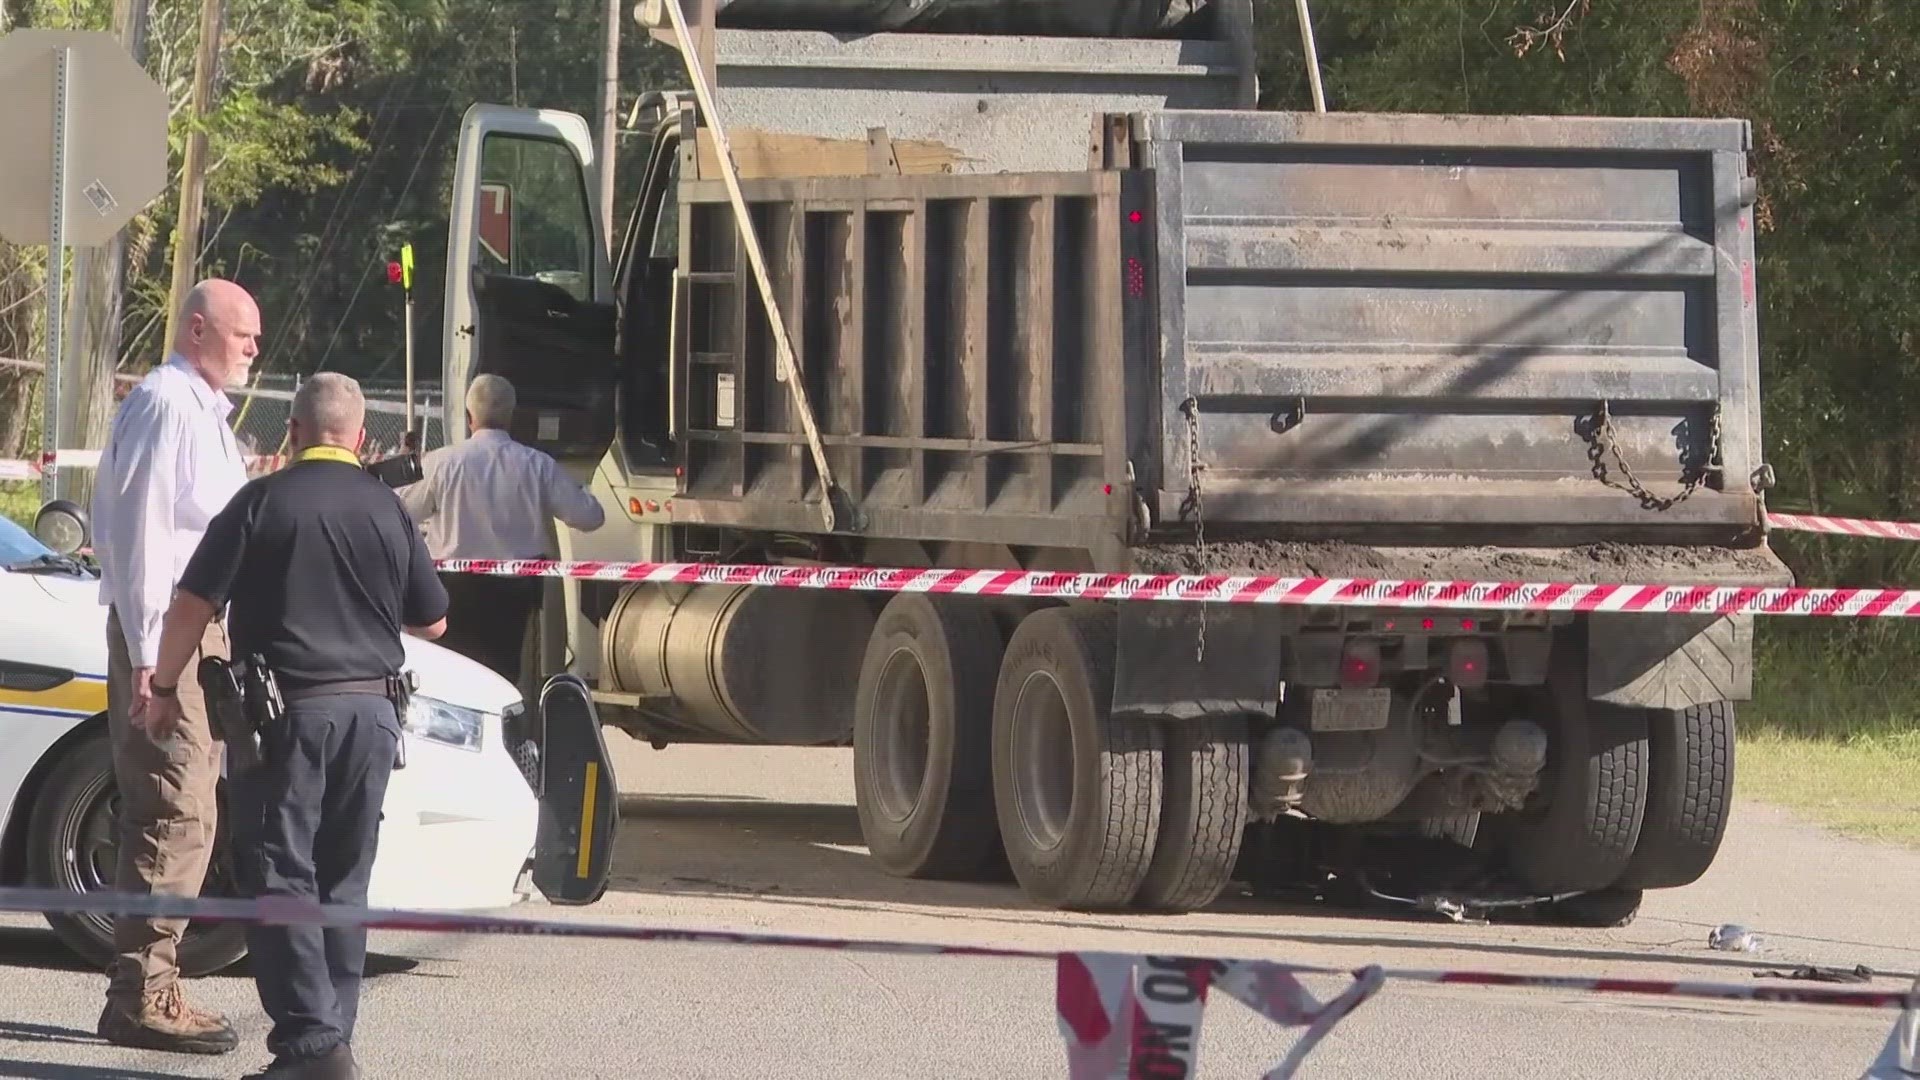 The Jacksonville Sheriff's Office says there were no indicators of impairment among the drivers involved in the crash, as it was simply a "tragic accident" Thursday.